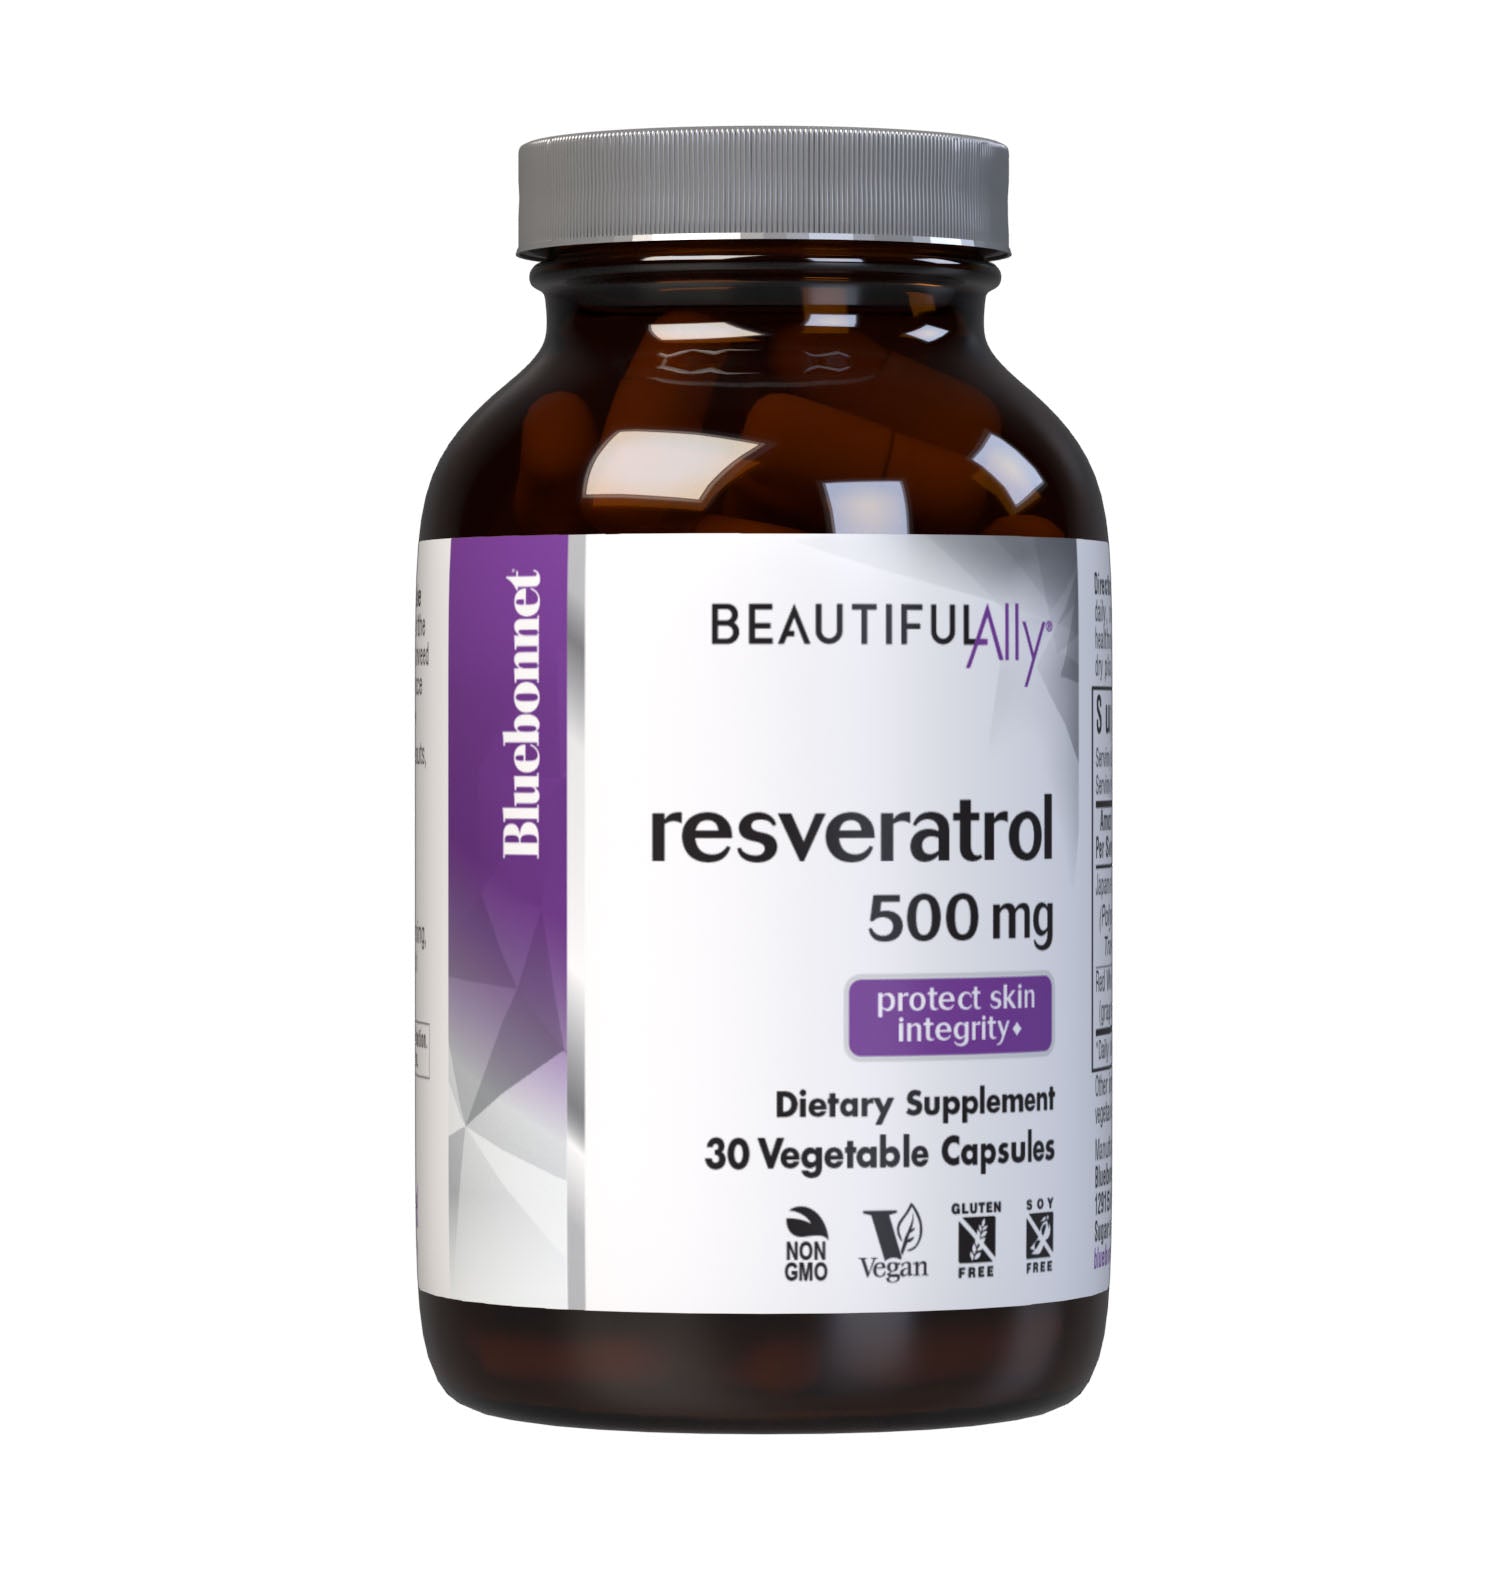 Bluebonnet’s Beautiful Ally Resveratrol 500 mg 30 Vegetable Capsules are specially formulated to help protect skin with the active trans isomer form of resveratrol from Japanese knotweed and 4:1 red wine extract from grape berry fruit to help reduce free-radical damage, which may improve skin integrity. #size_30 count